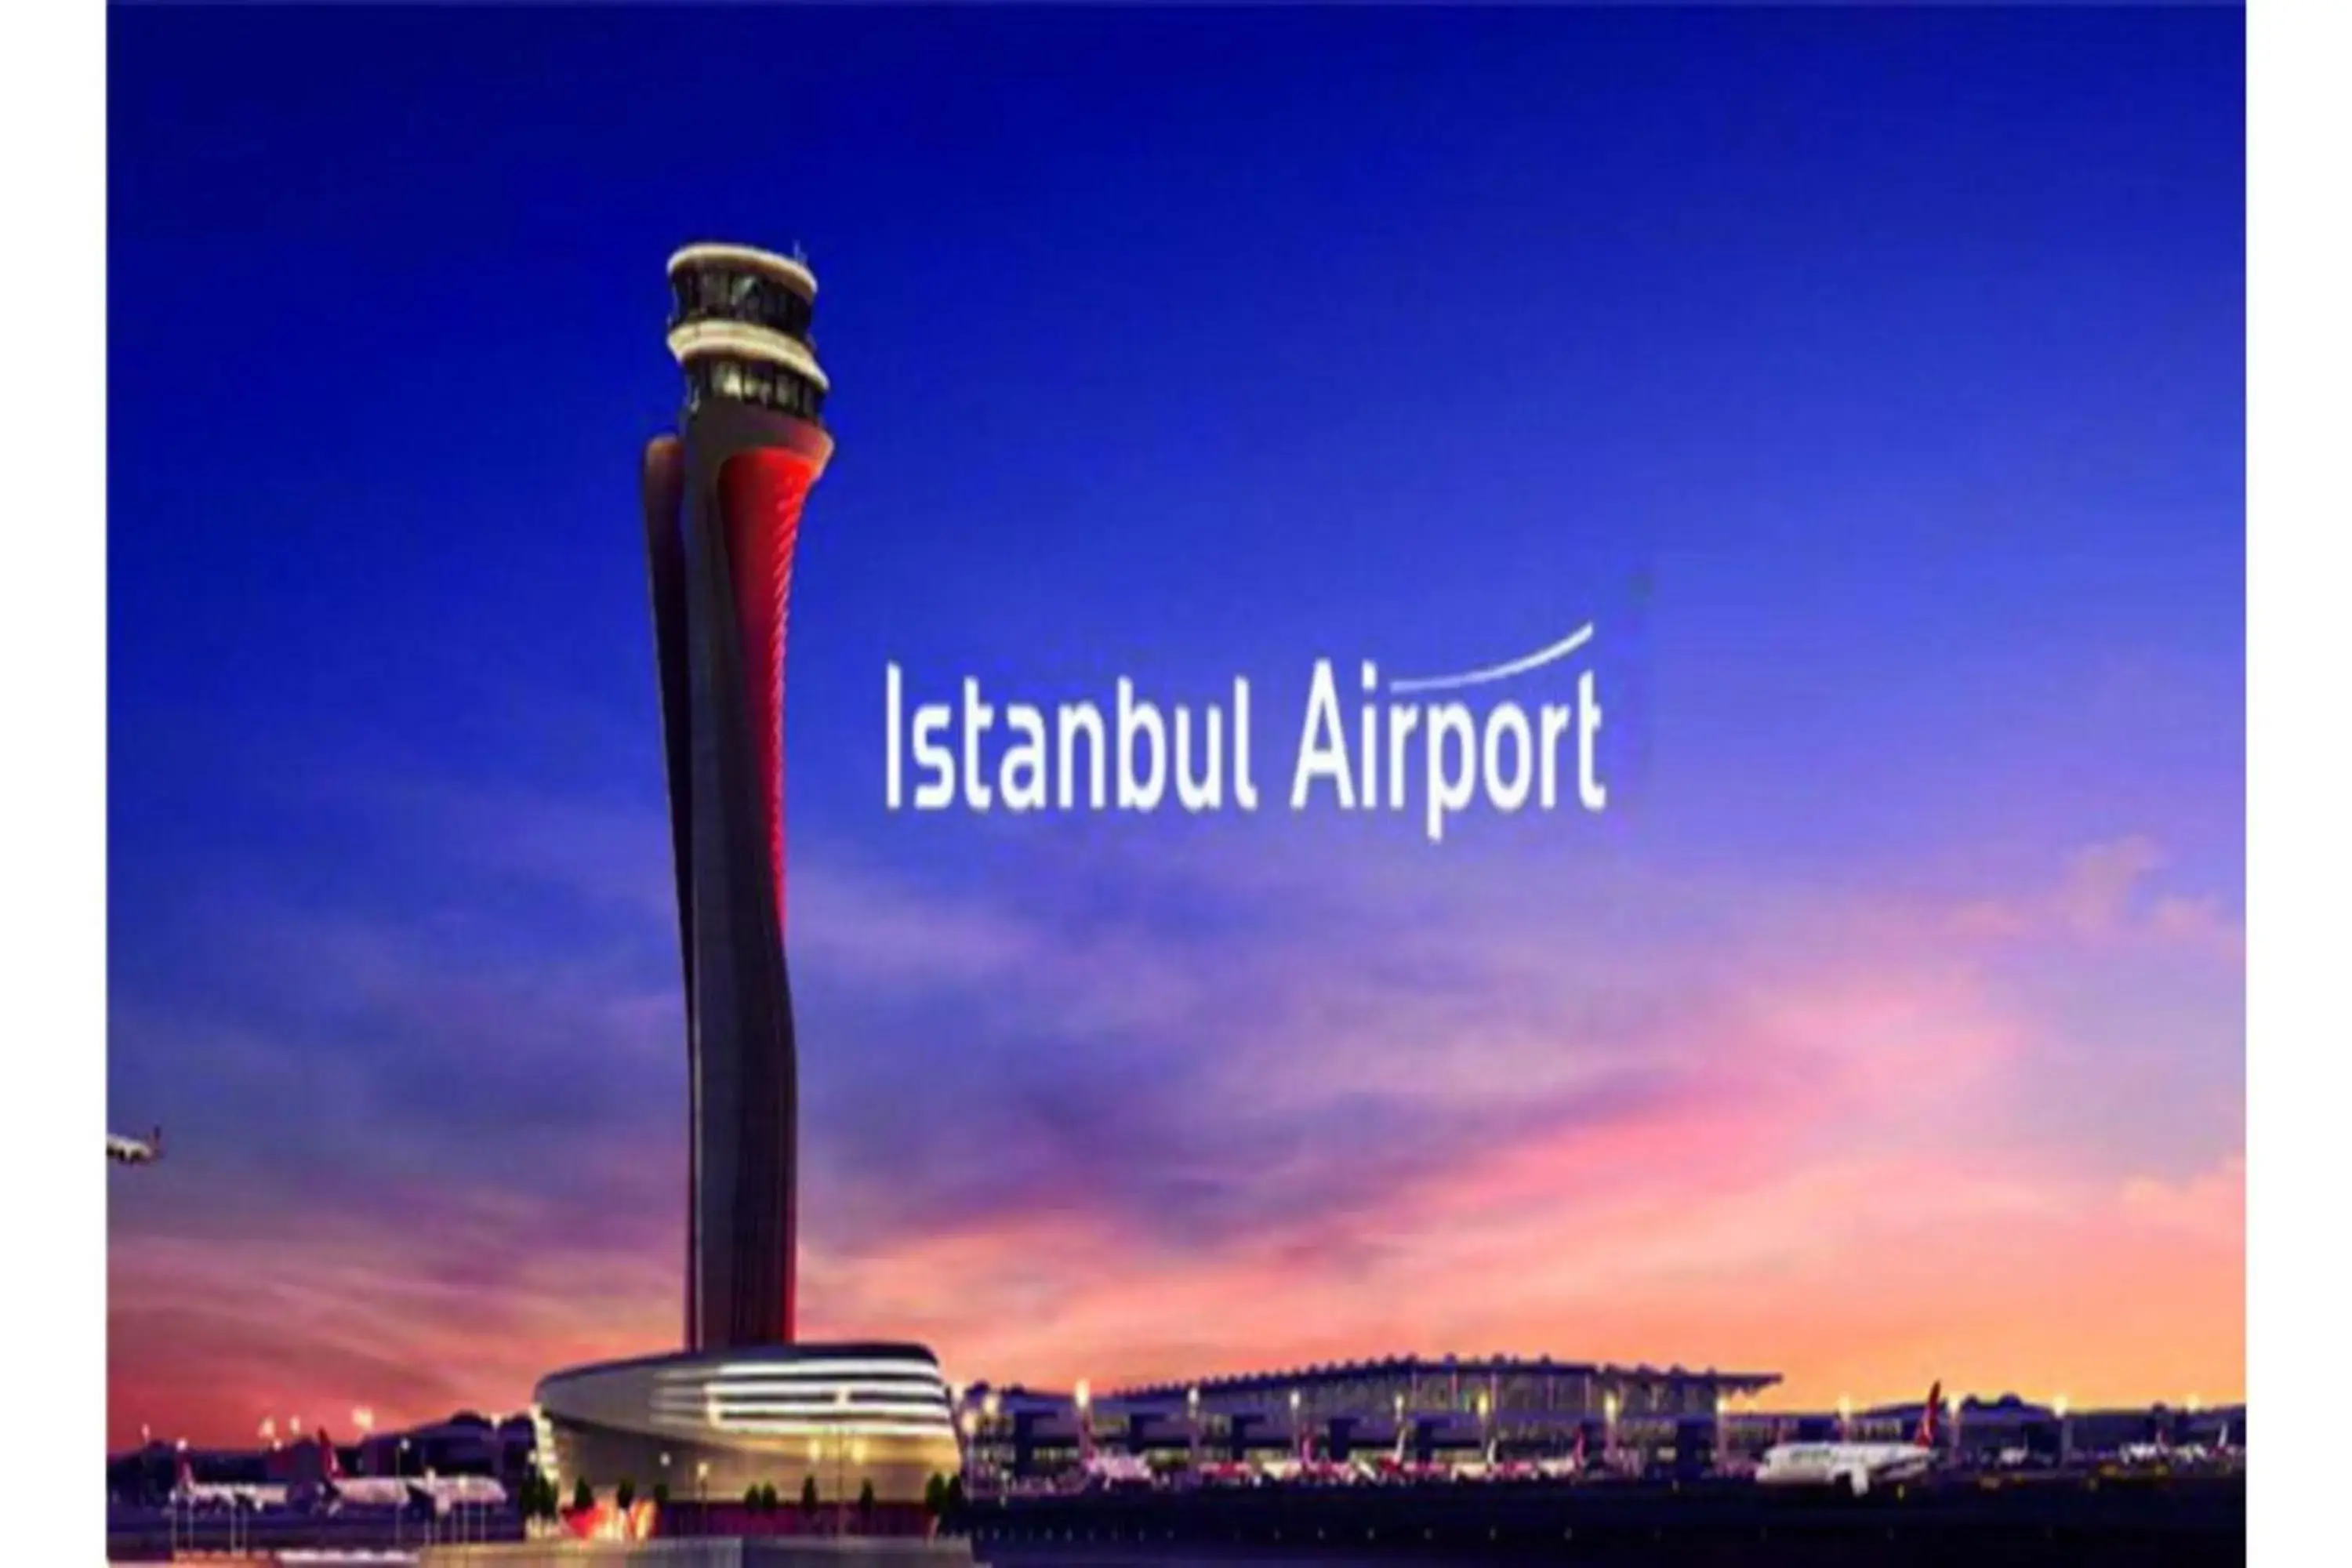 Nearby landmark in Istanbul Airport Express Hotel